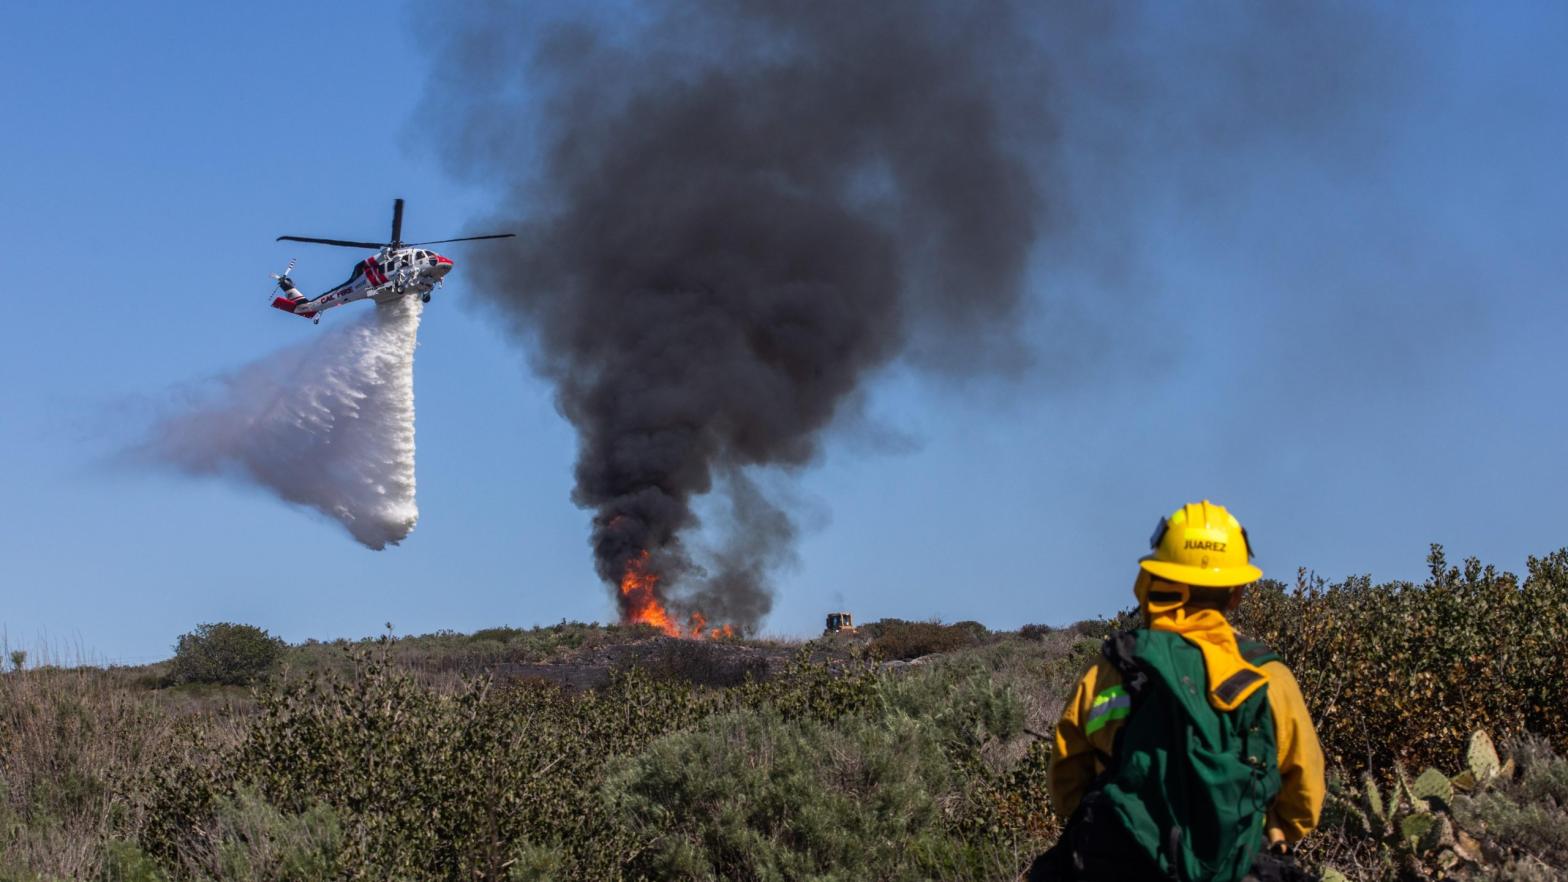 A firefighter watches as a helicopter drops water on a smouldering hillside on February 10, 2022 in Laguna Beach, California. (Photo: Apu Gomes, Getty Images)